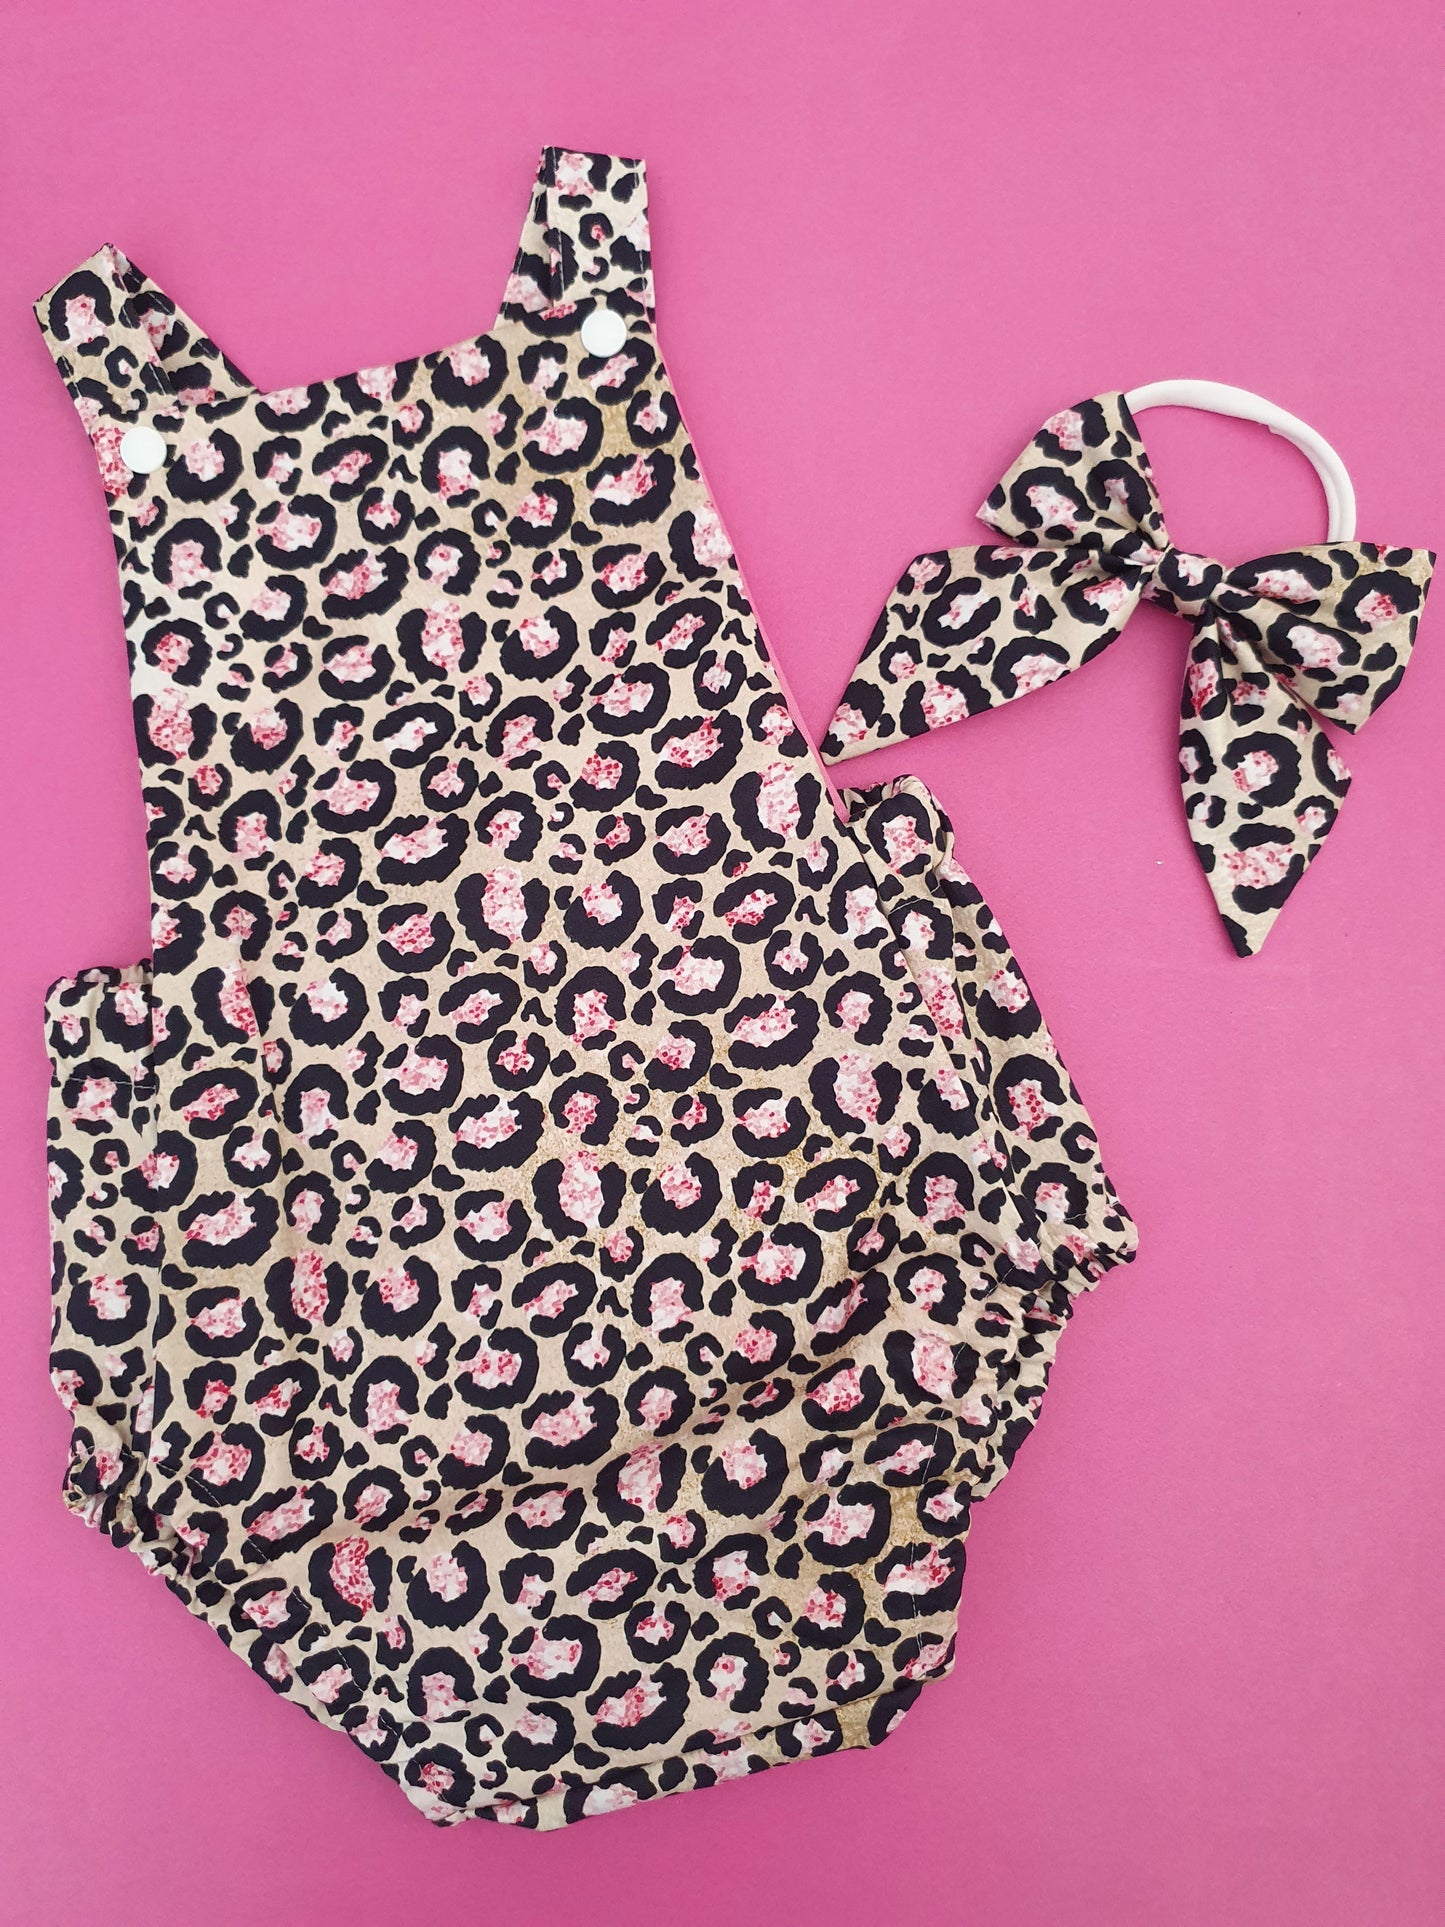 CHEETAH PRINT Baby Romper and Headband Set, 1st Birthday / Cake Smash Outfit, SIZE 1 ANIMAL PRINT, 12 - 18 months